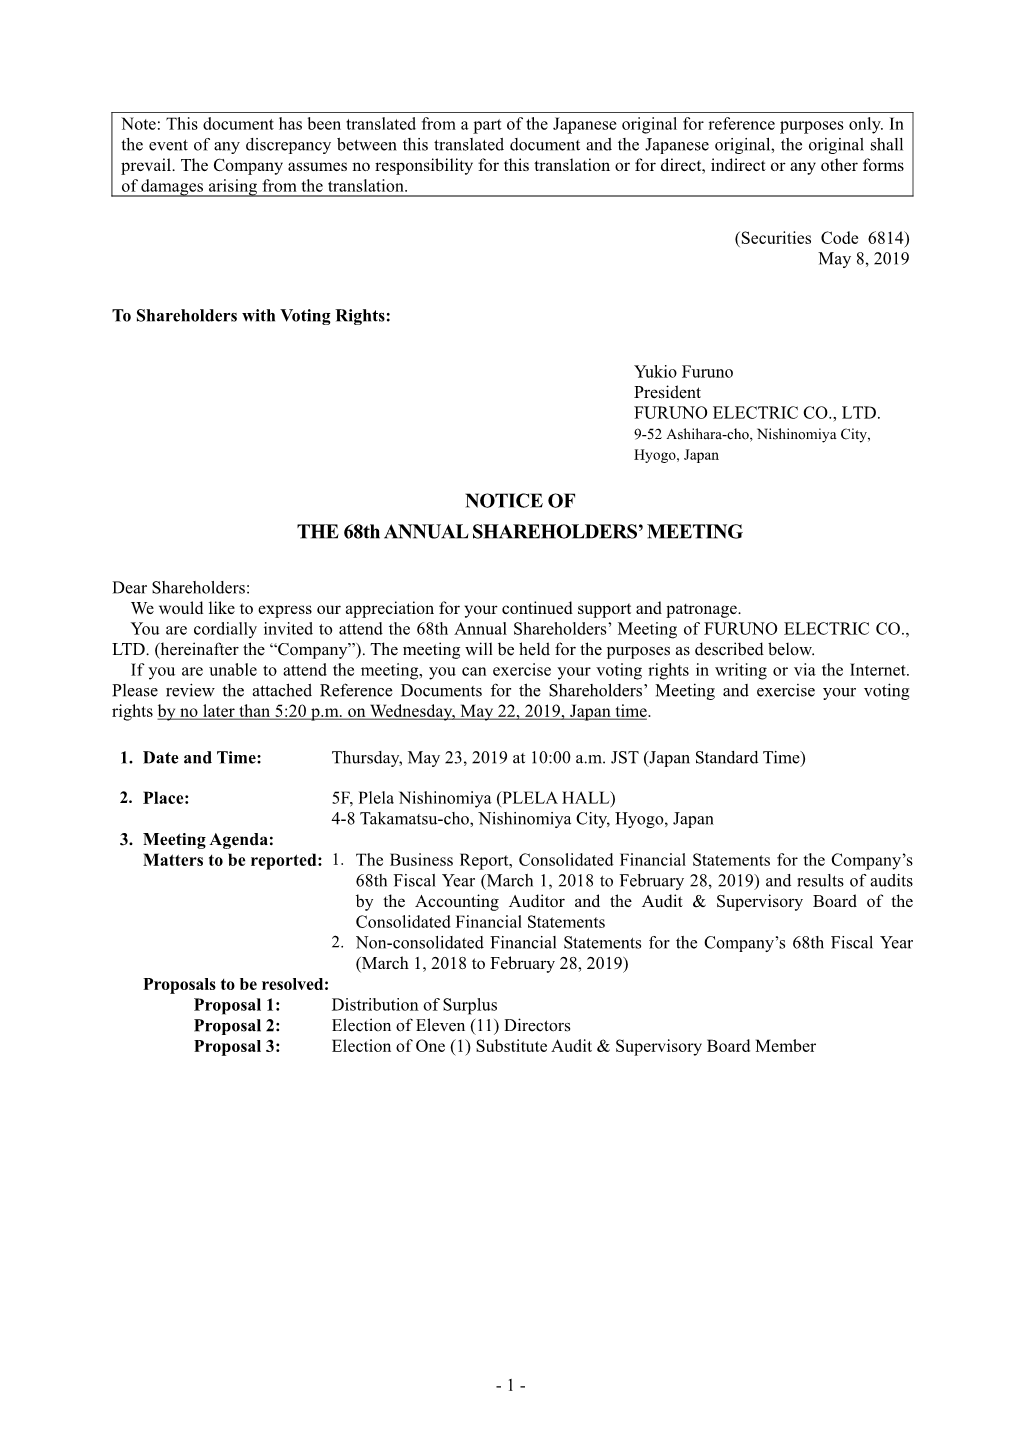 NOTICE of the 68Th ANNUAL SHAREHOLDERS' MEETING